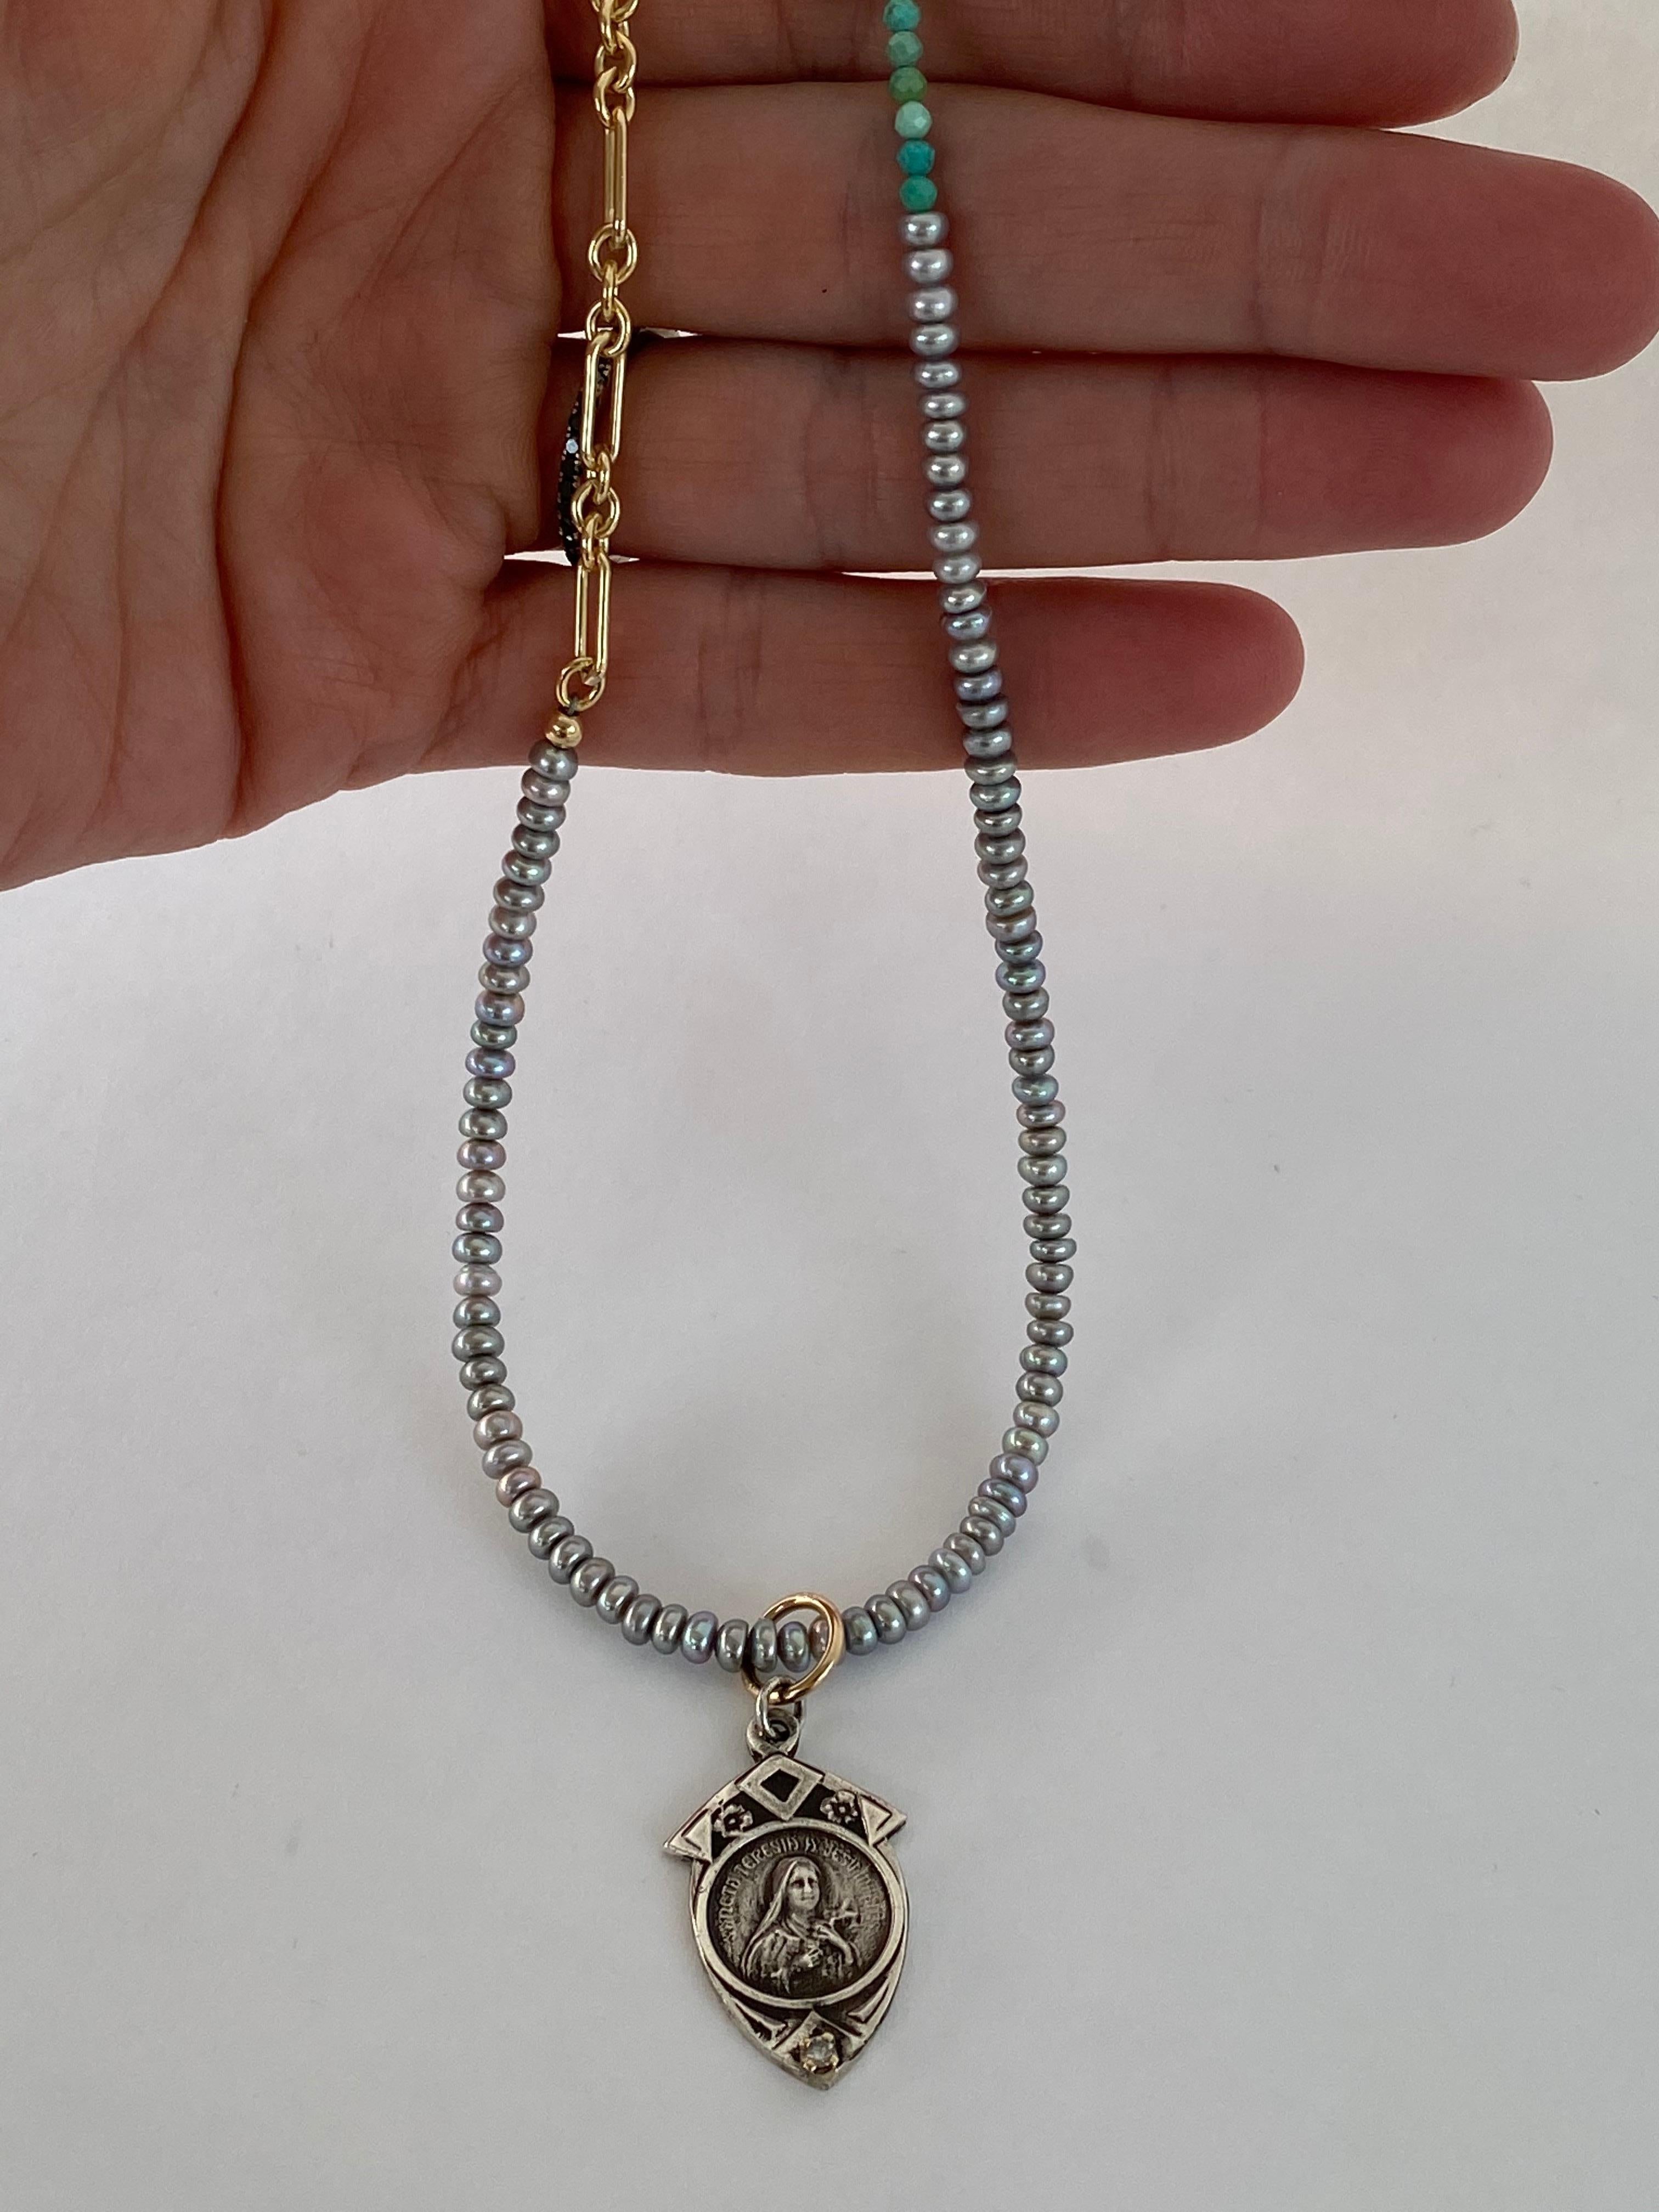 Medal Virgin Mary Necklace Bead Silver Pendant Pearl Turquoise J Dauphin

Exclusive piece with a Virgin Mary Medal in Silver with a White Diamond set in a Gold Prong with a silver sweatwater pearl, turquoise and gold filled Chain. 

Symbols or